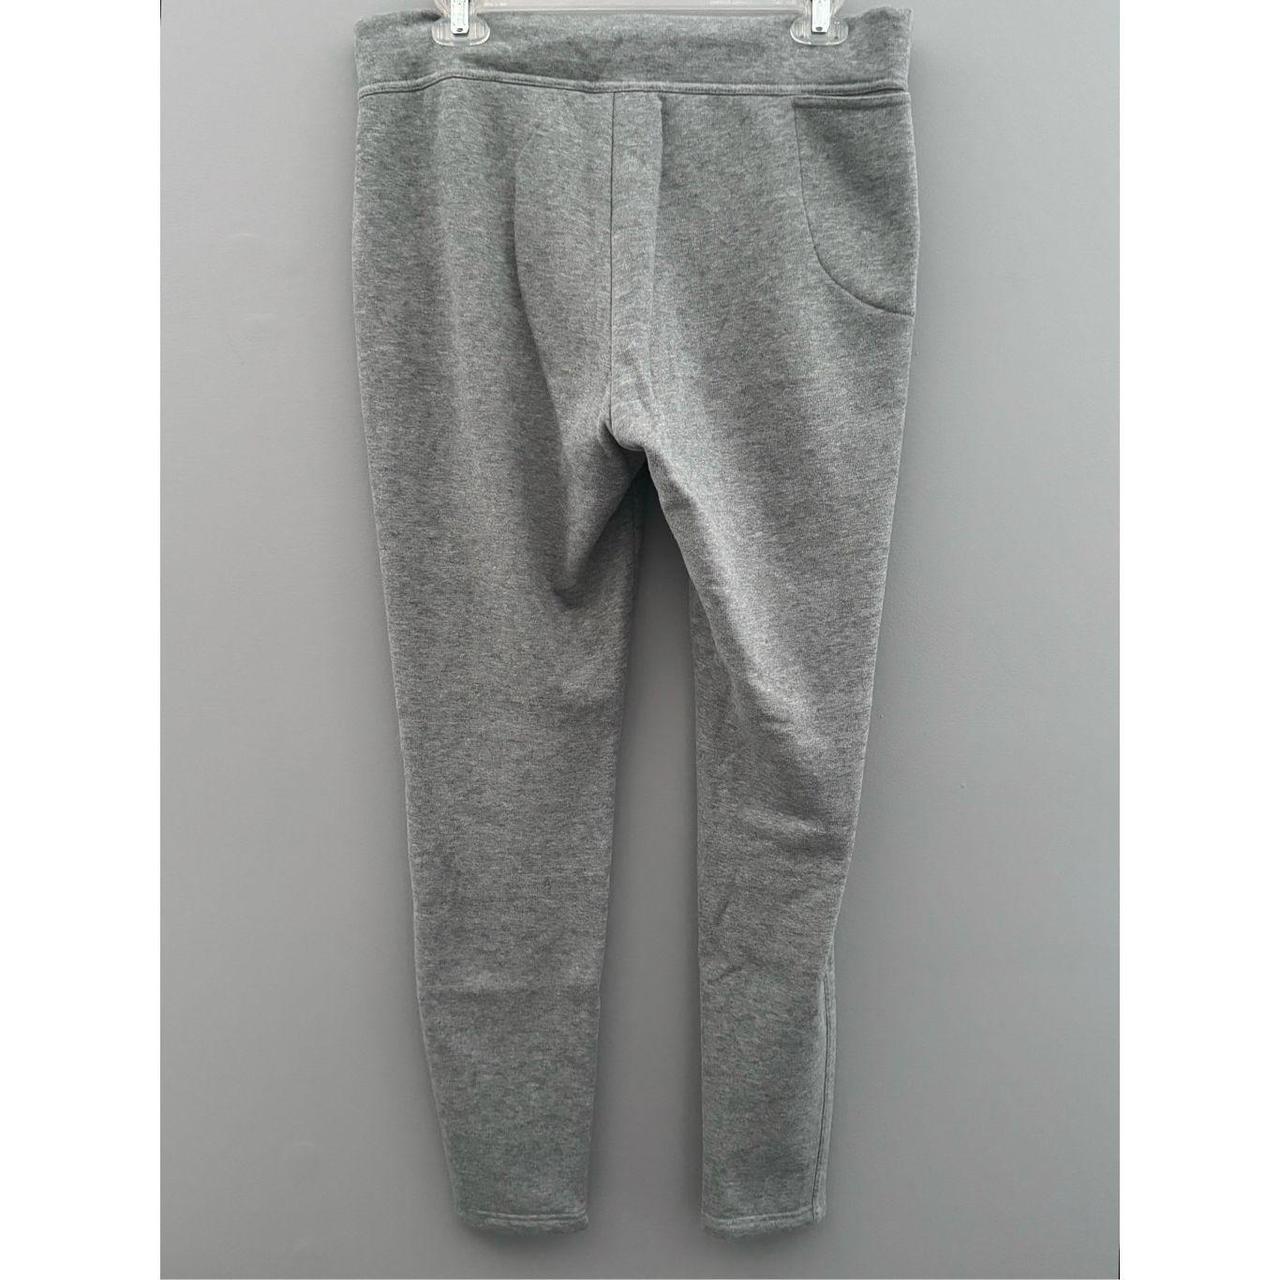 Lands' End Serious Sweats, size M Gray One back - Depop